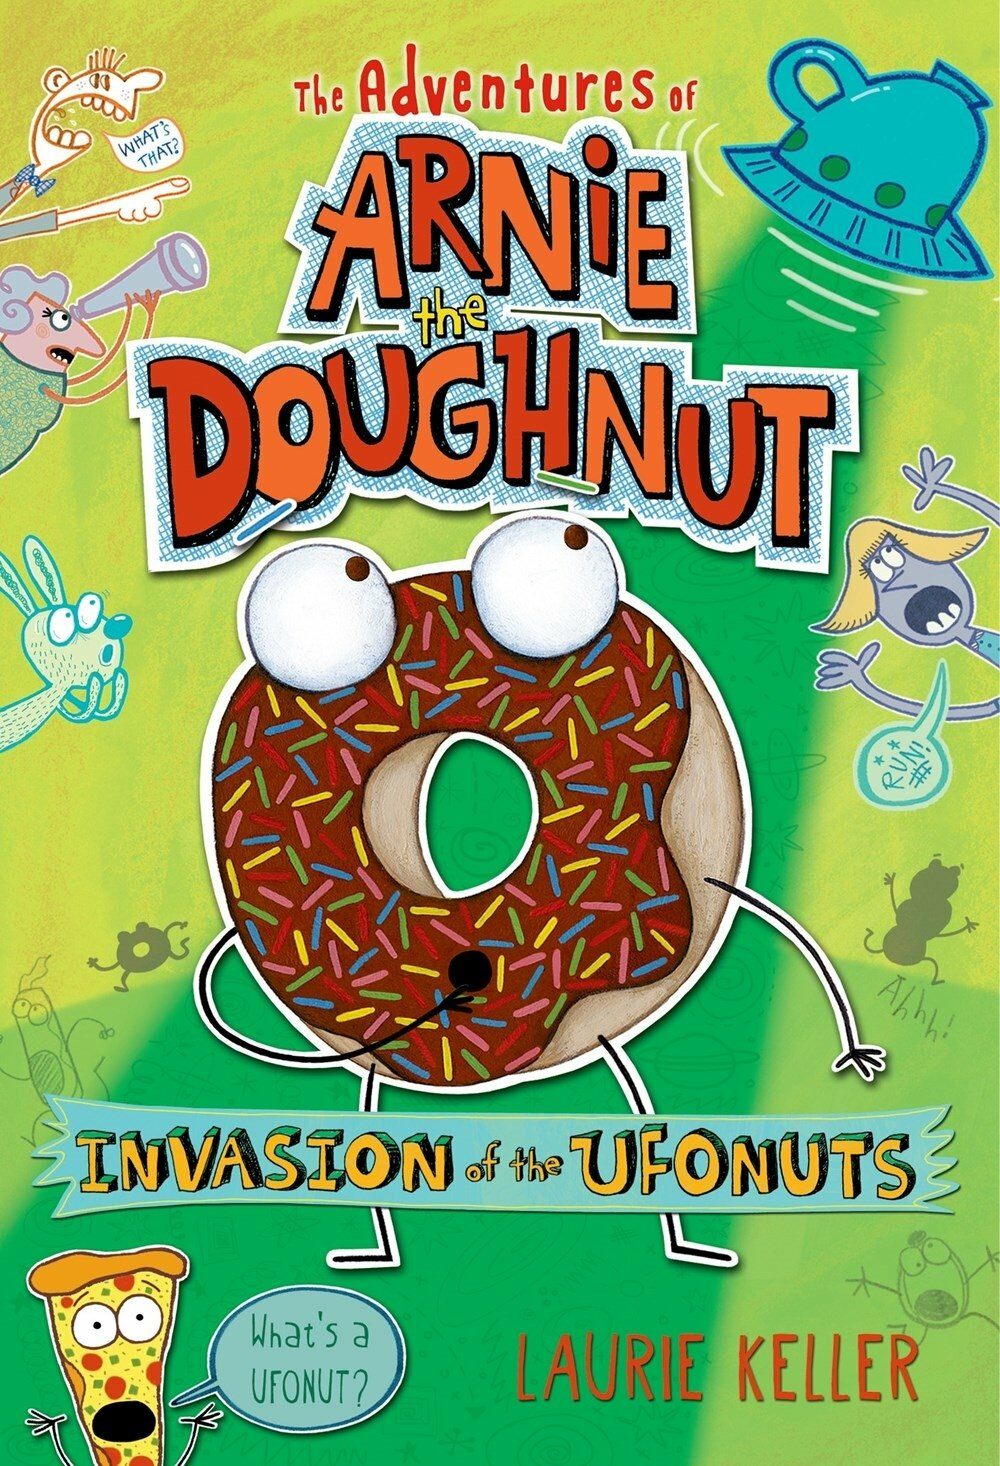 Invasion of the Ufonuts: The Adventures of Arnie the Doughnut (Paperback)